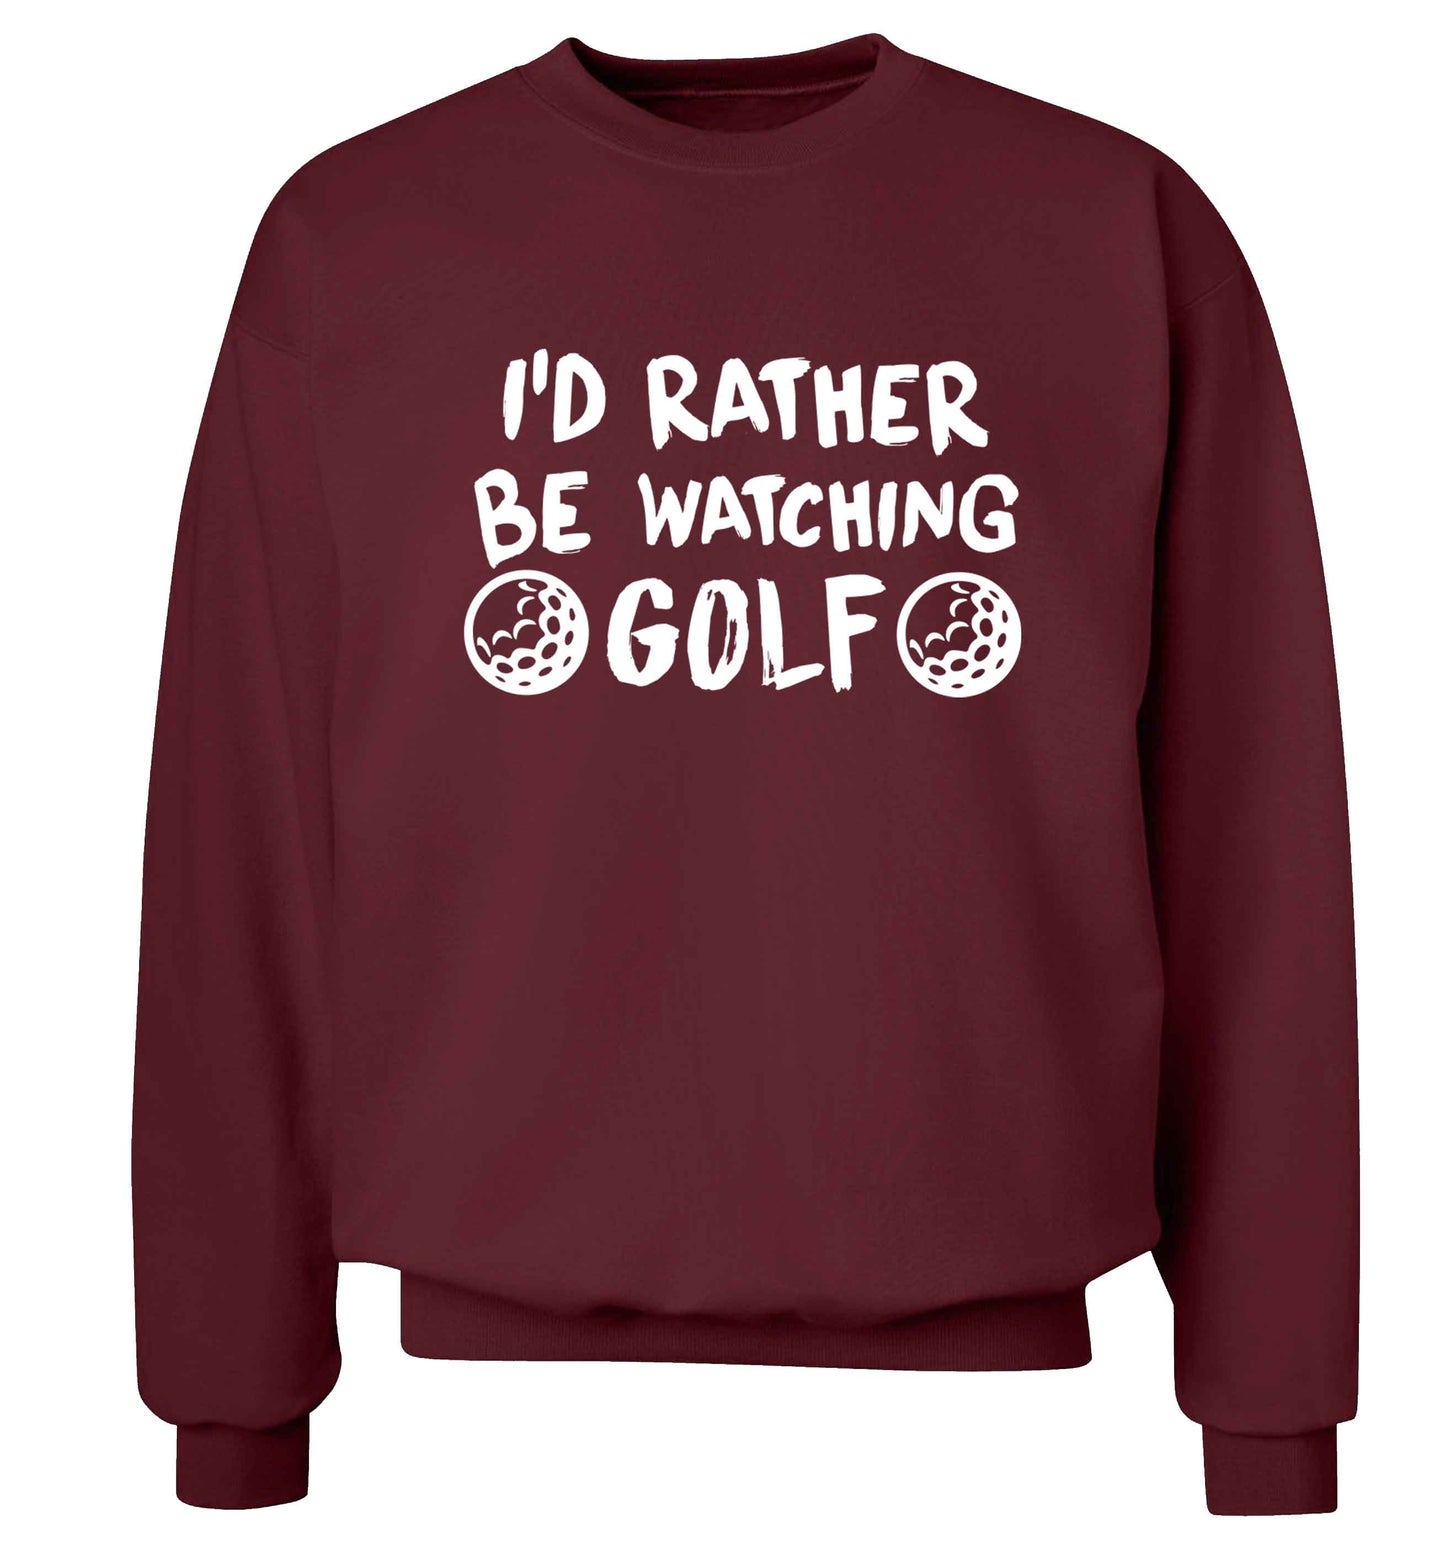 I'd rather be watching golf Adult's unisex maroon Sweater 2XL